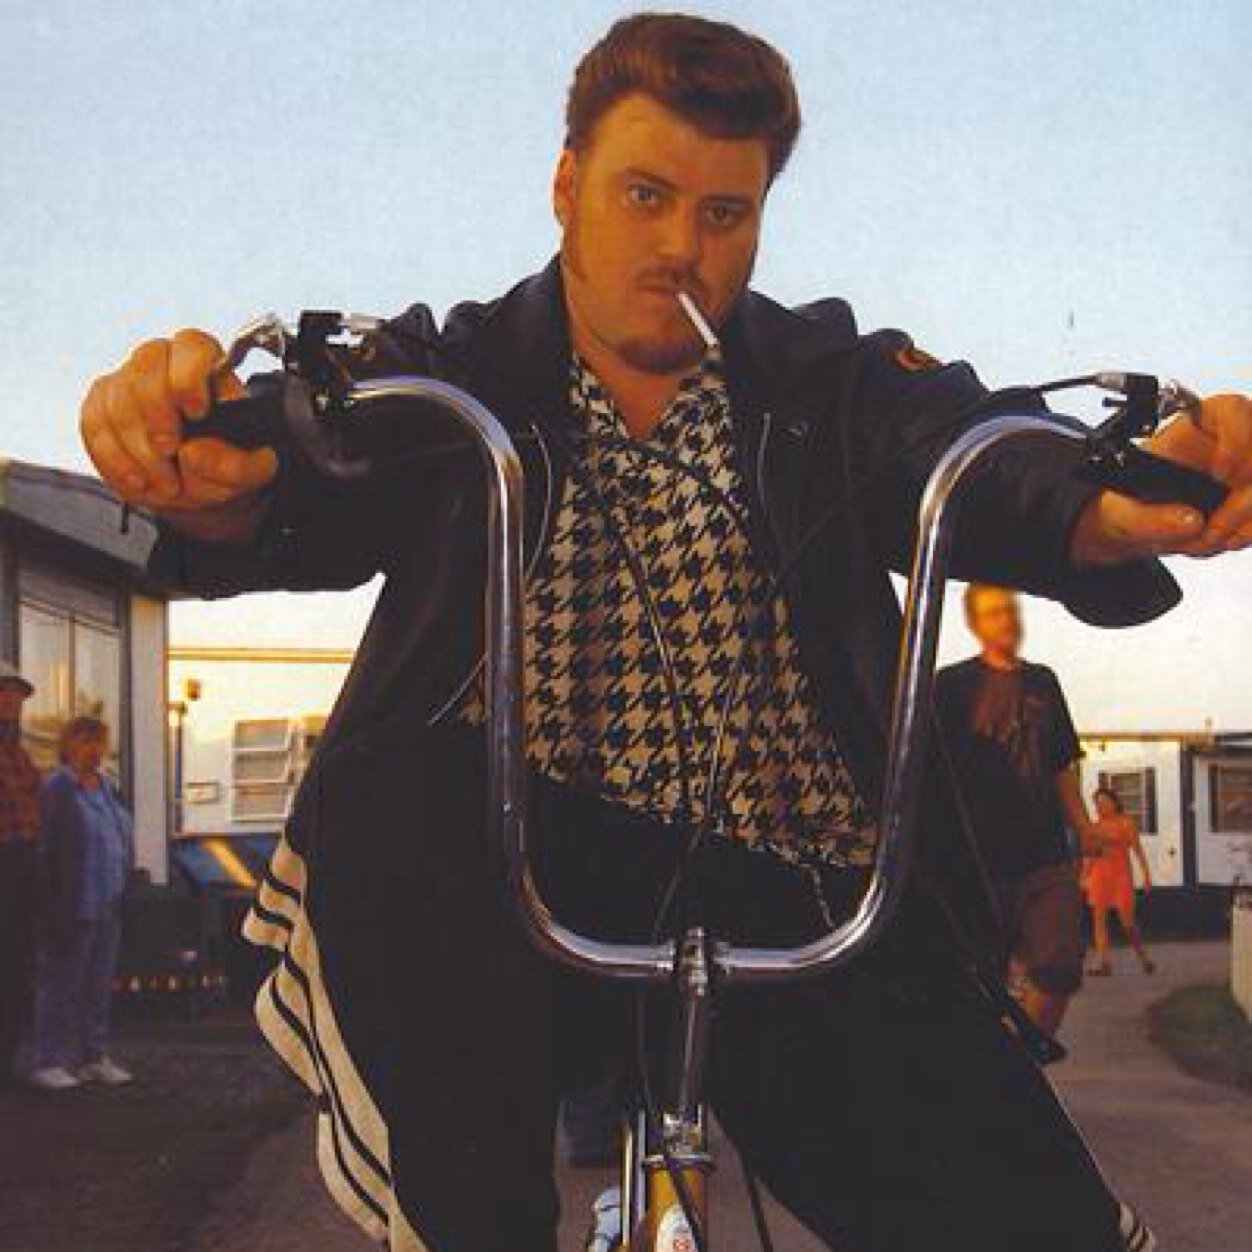 Trailer park boys quotes and sayings